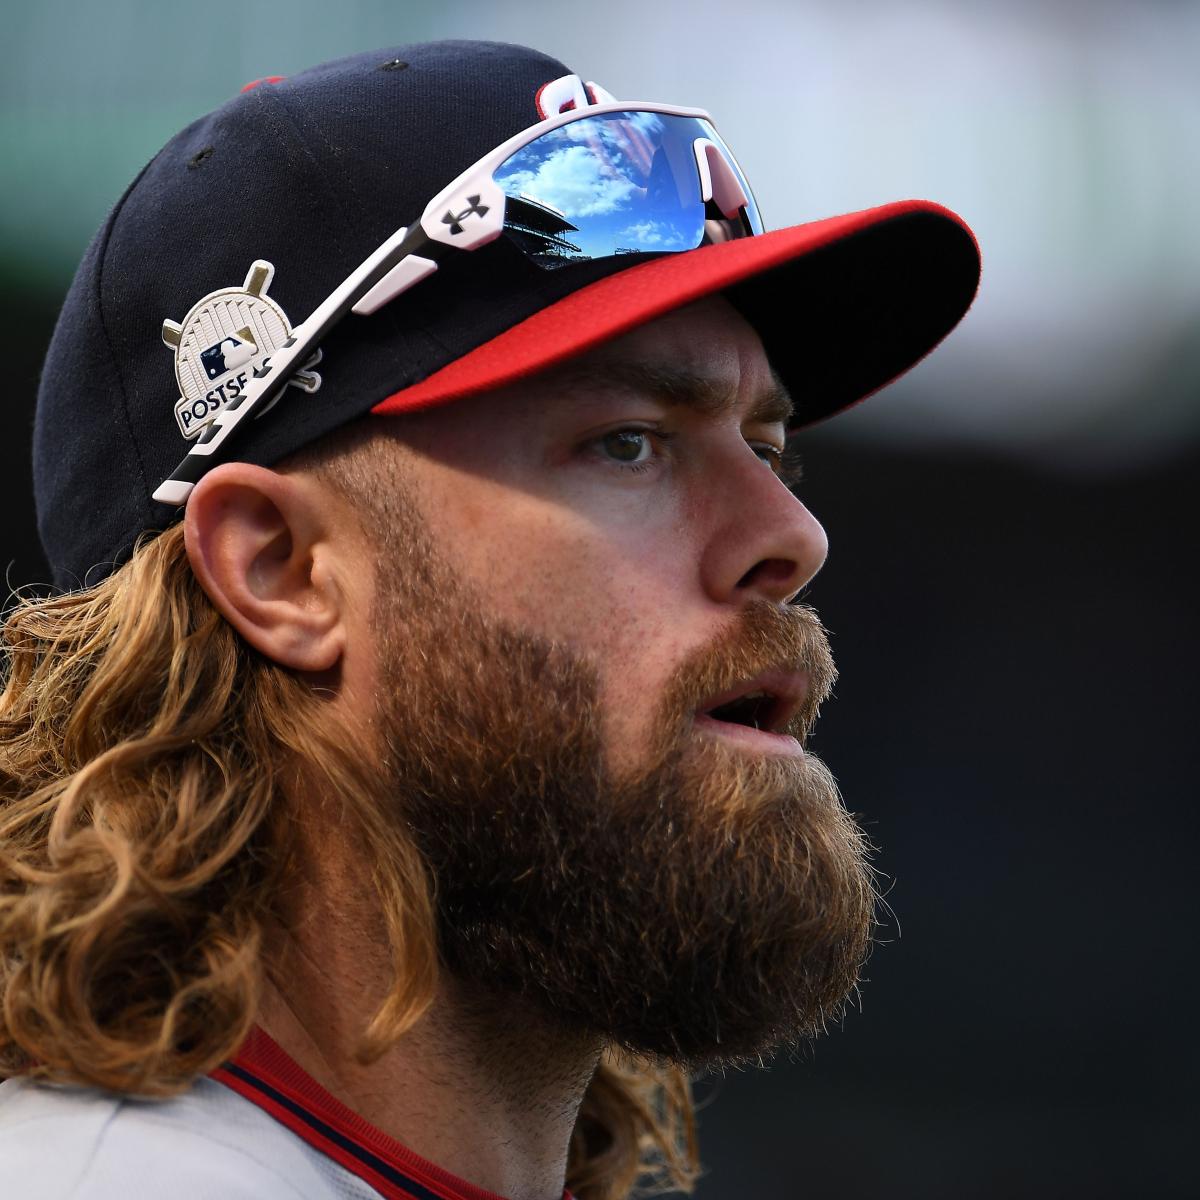 MLB Rumors: Five Ways For The Phillies to Solve Life After Jayson Werth, News, Scores, Highlights, Stats, and Rumors